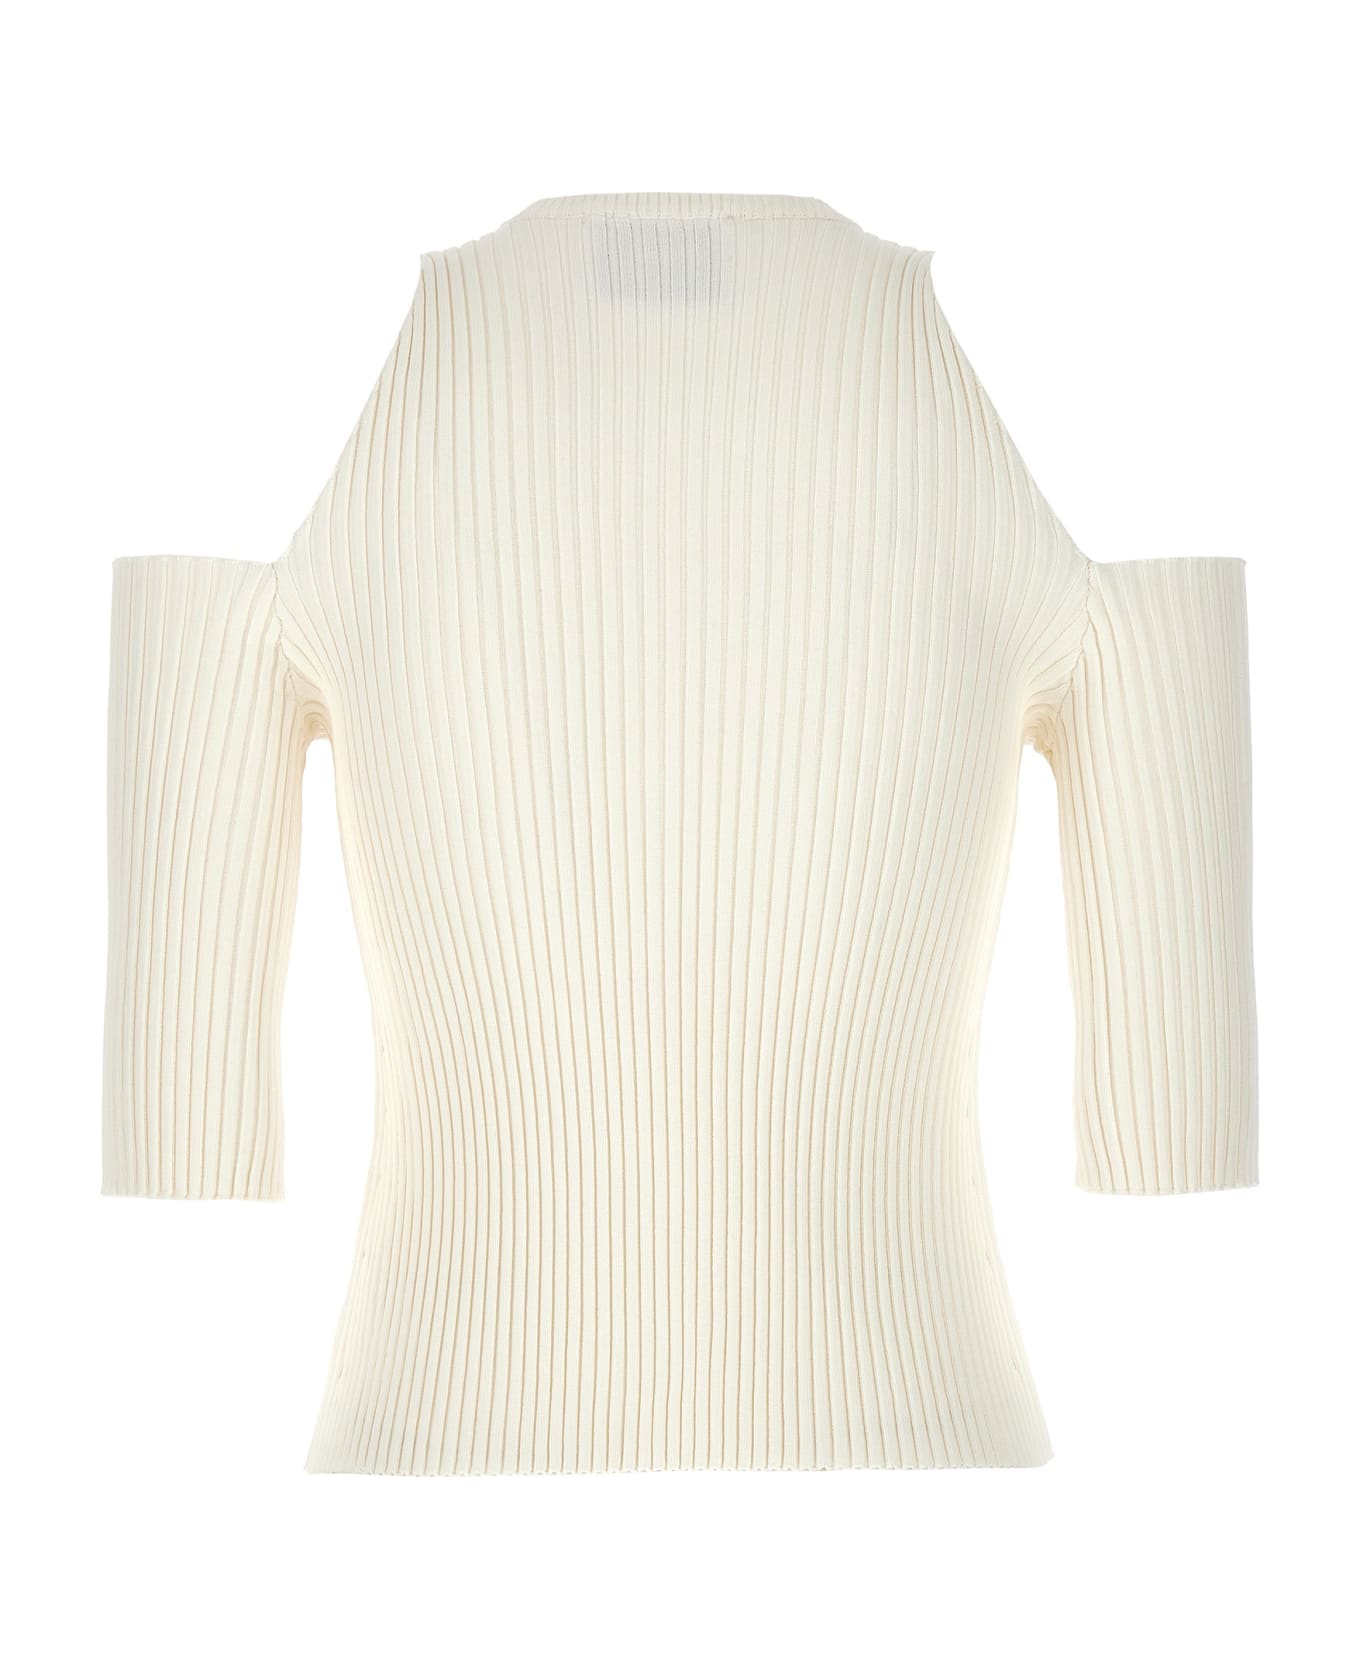 (nude) Cut-out Knit Top - White